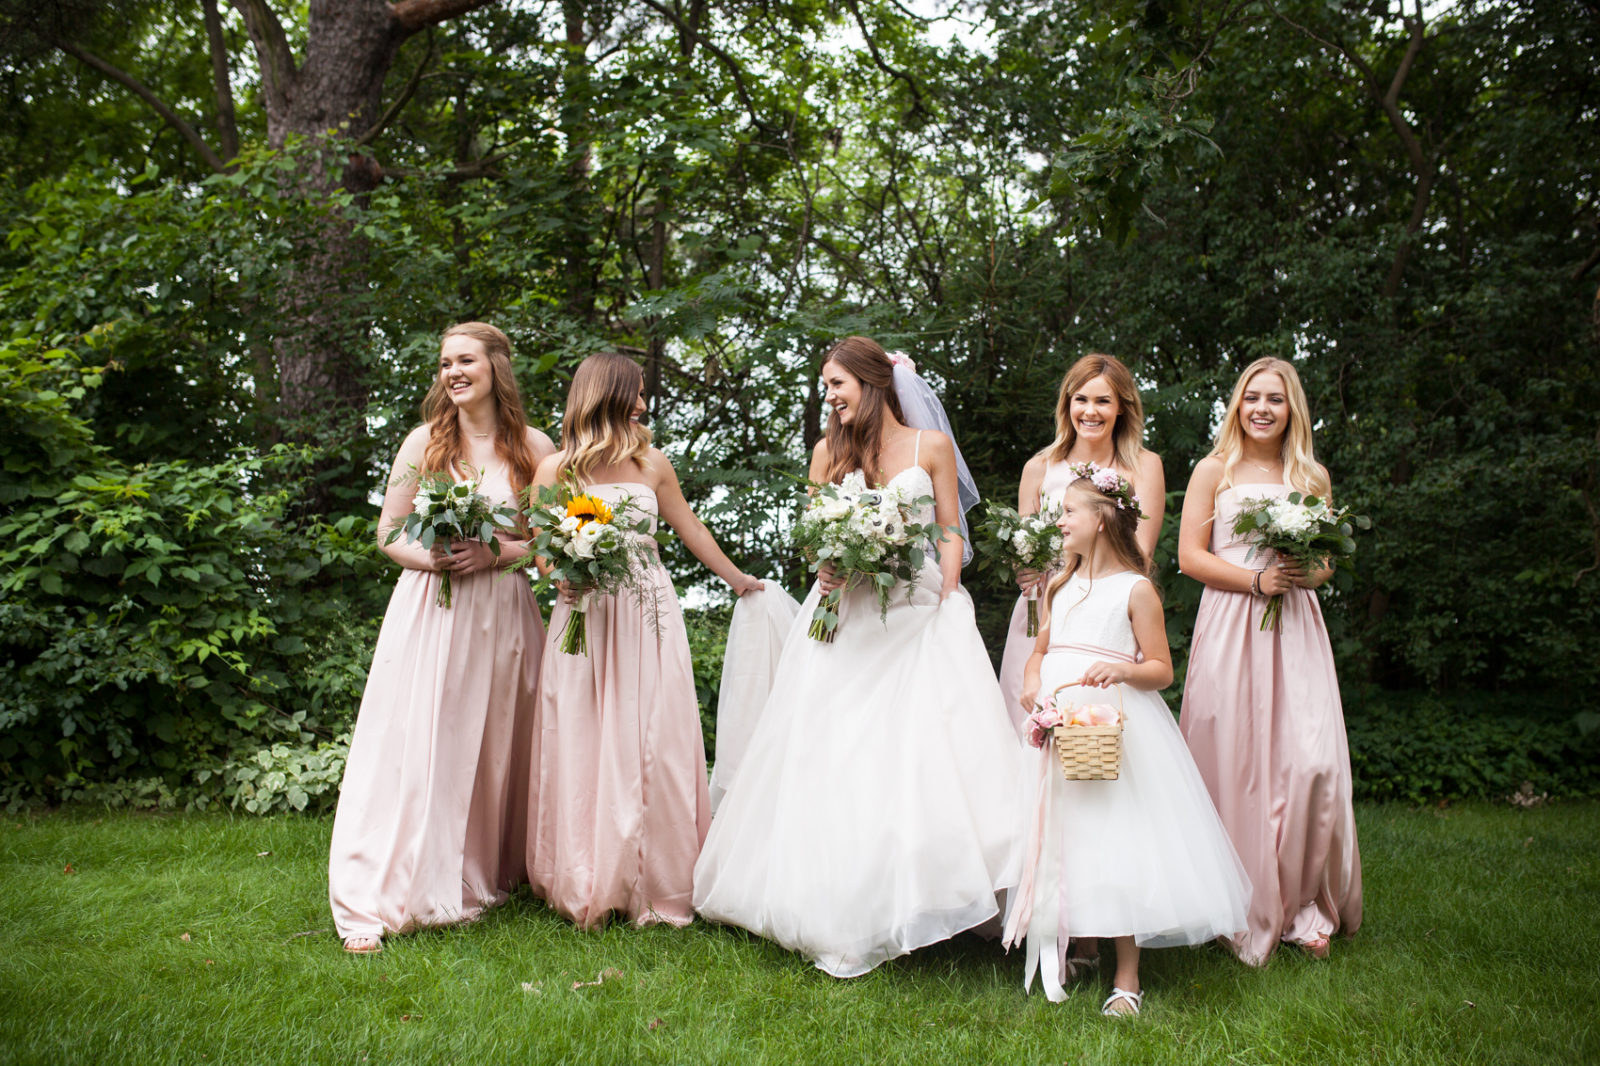 bridesmaids and bride, essence of australia wedding dress from Uptown Bridal at the farm at dover milwaukee with florals by Gia Bella Flowers makeup by Blush by Brittany